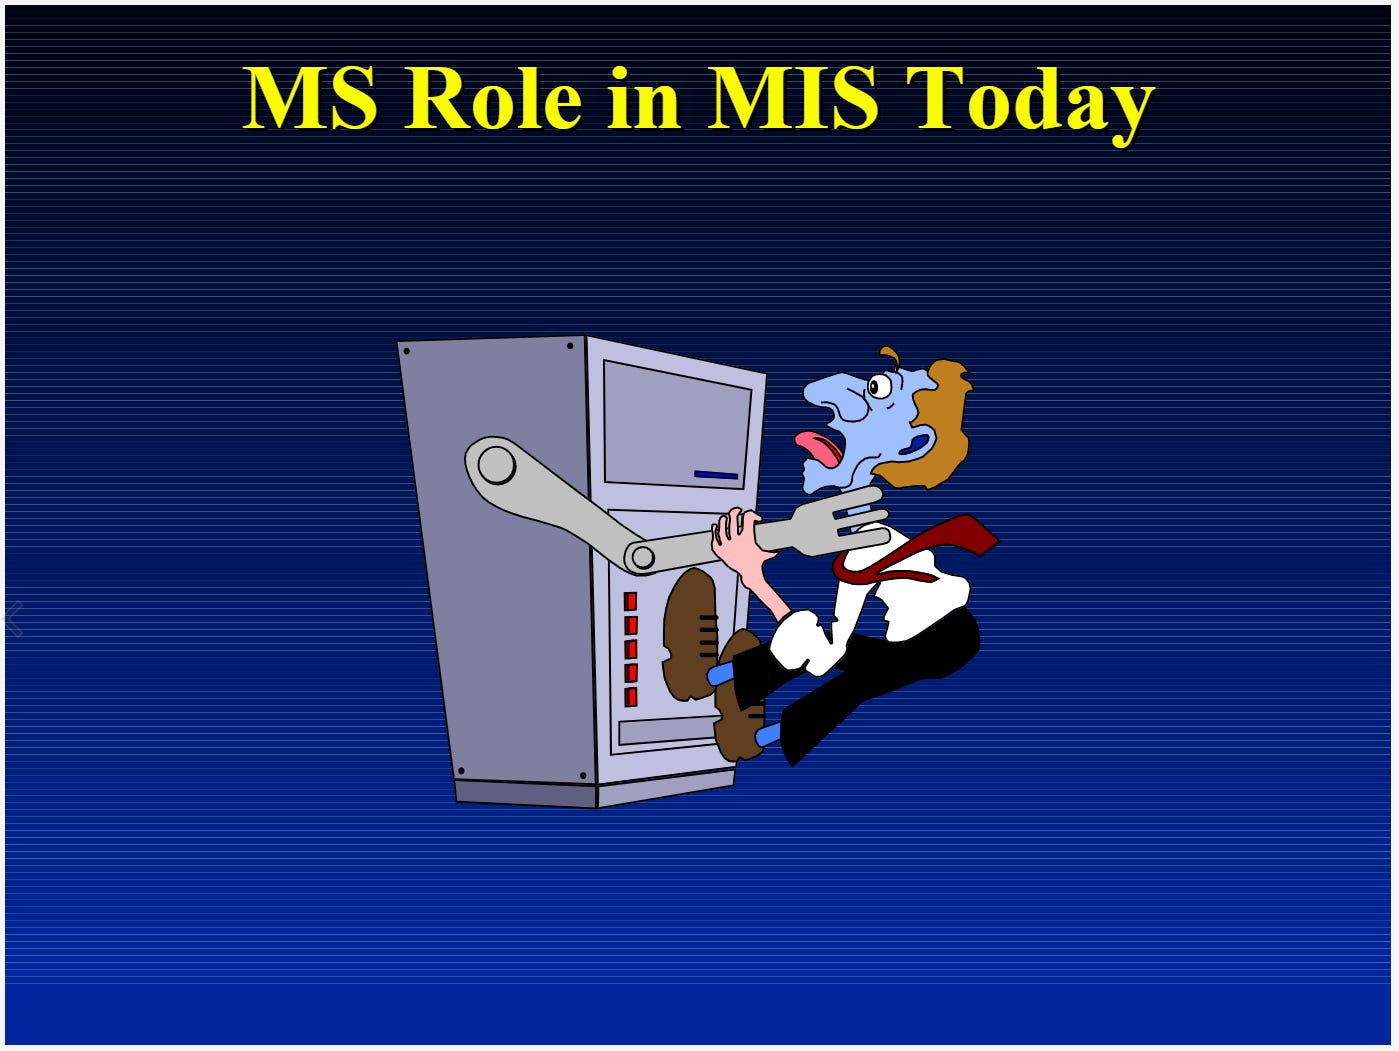 MS Role In MIS Today slide title. A mainframe computer strangling the IT person.